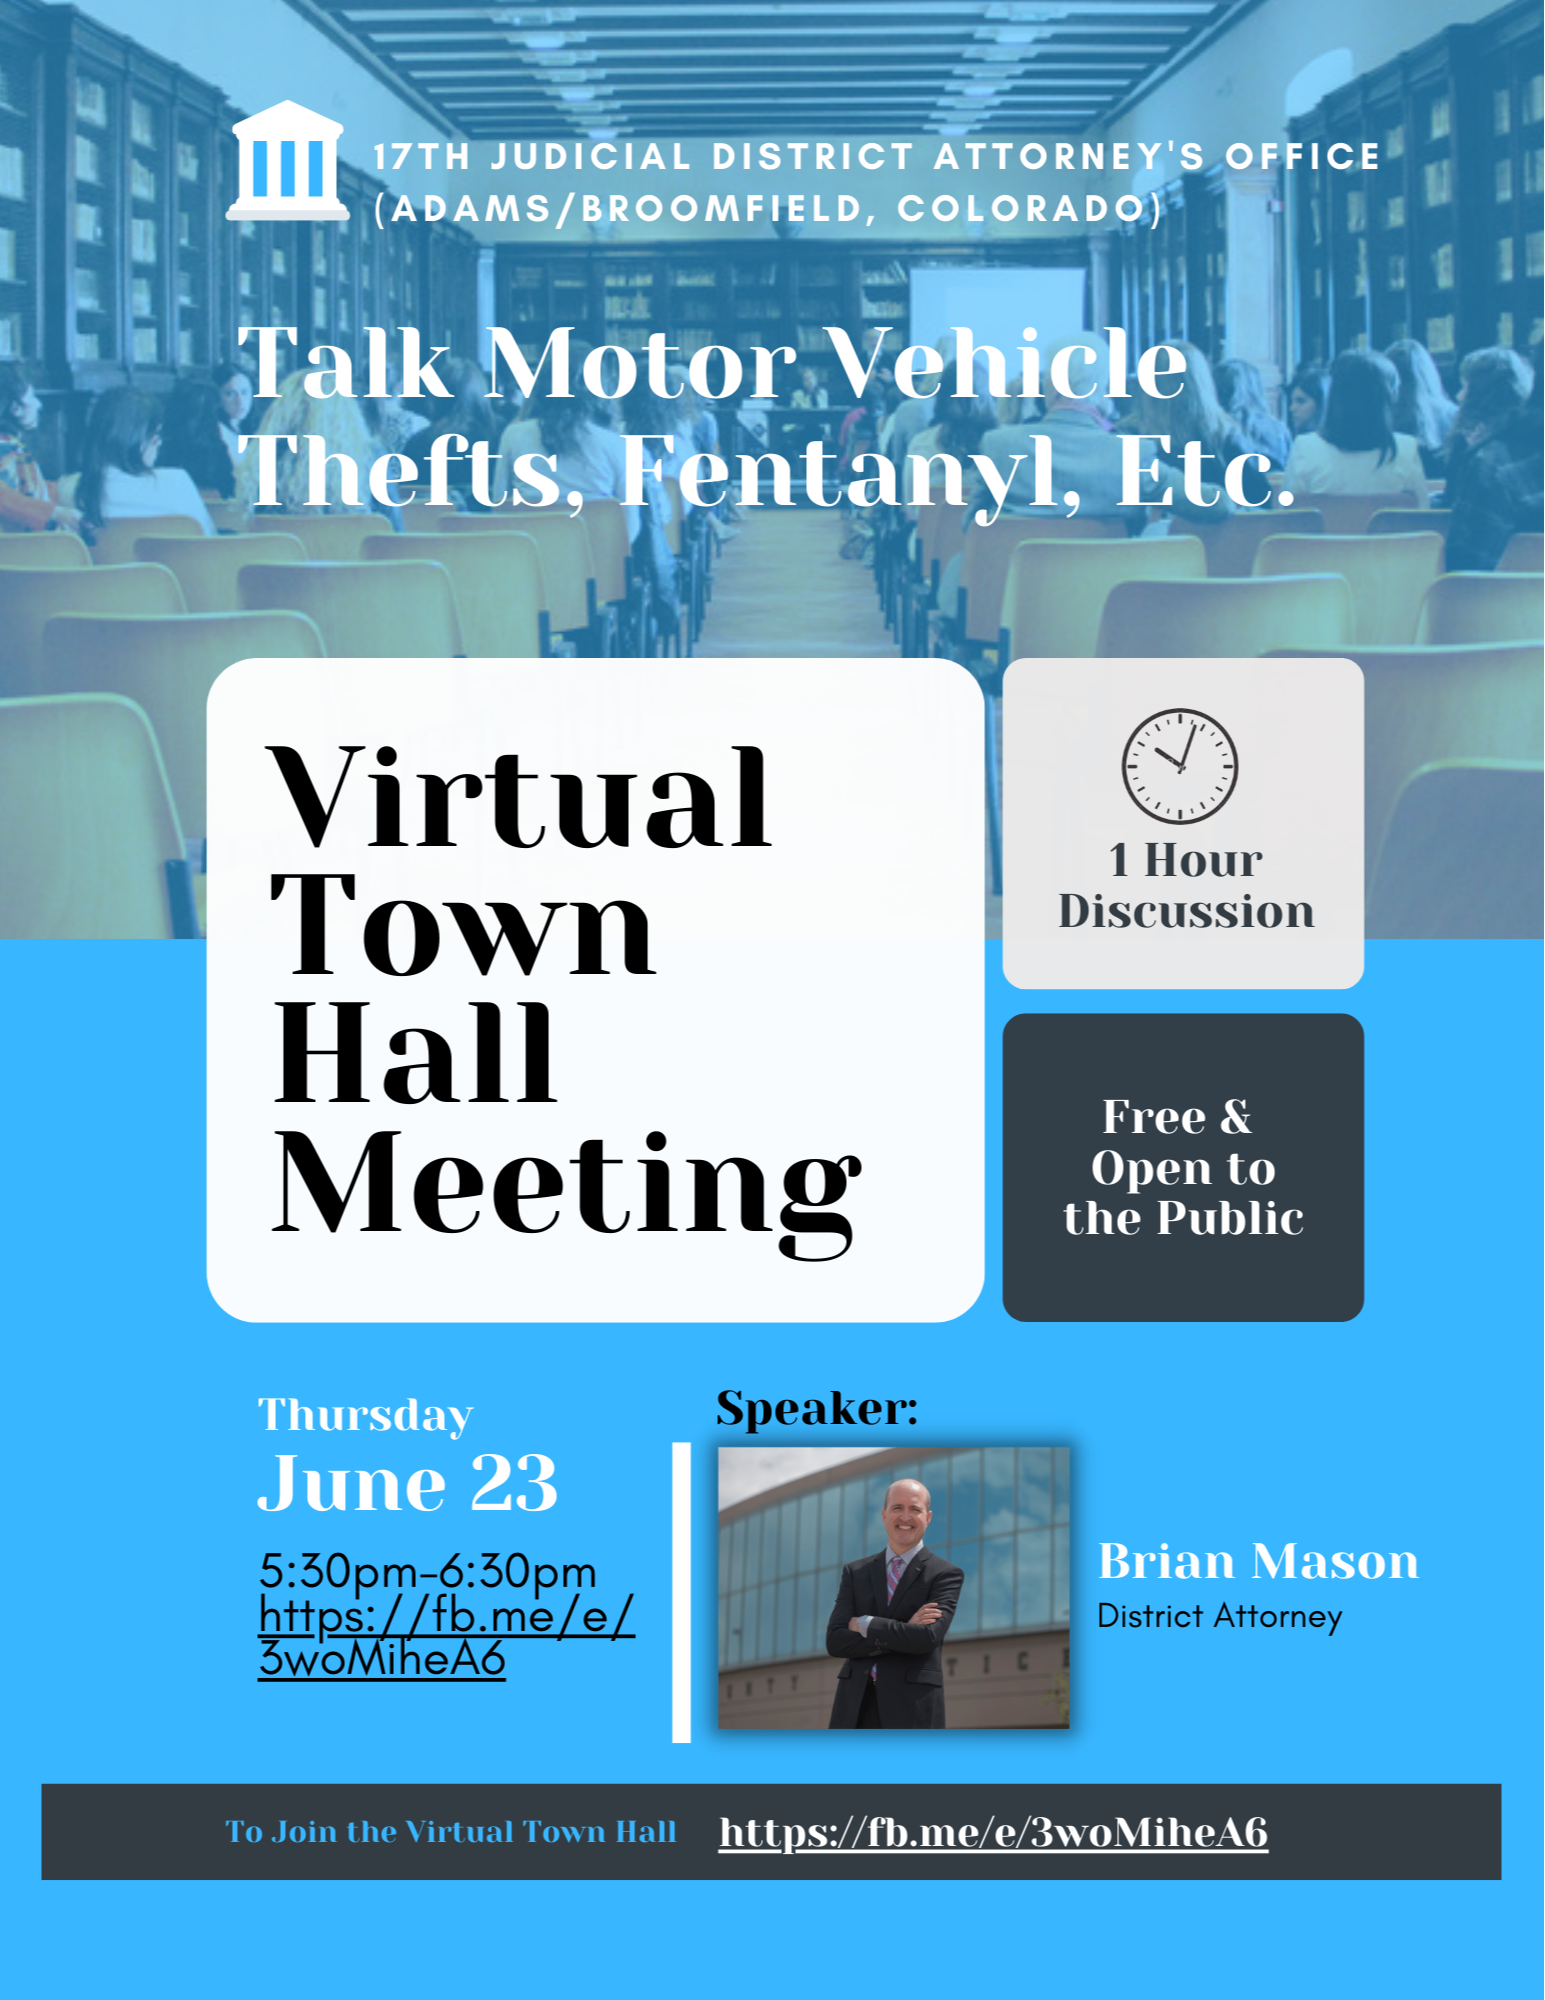 
DA Brian Mason to Host Virtual Town Hall to Discuss Motor Vehicle Thefts, Fentanyl, Etc. 